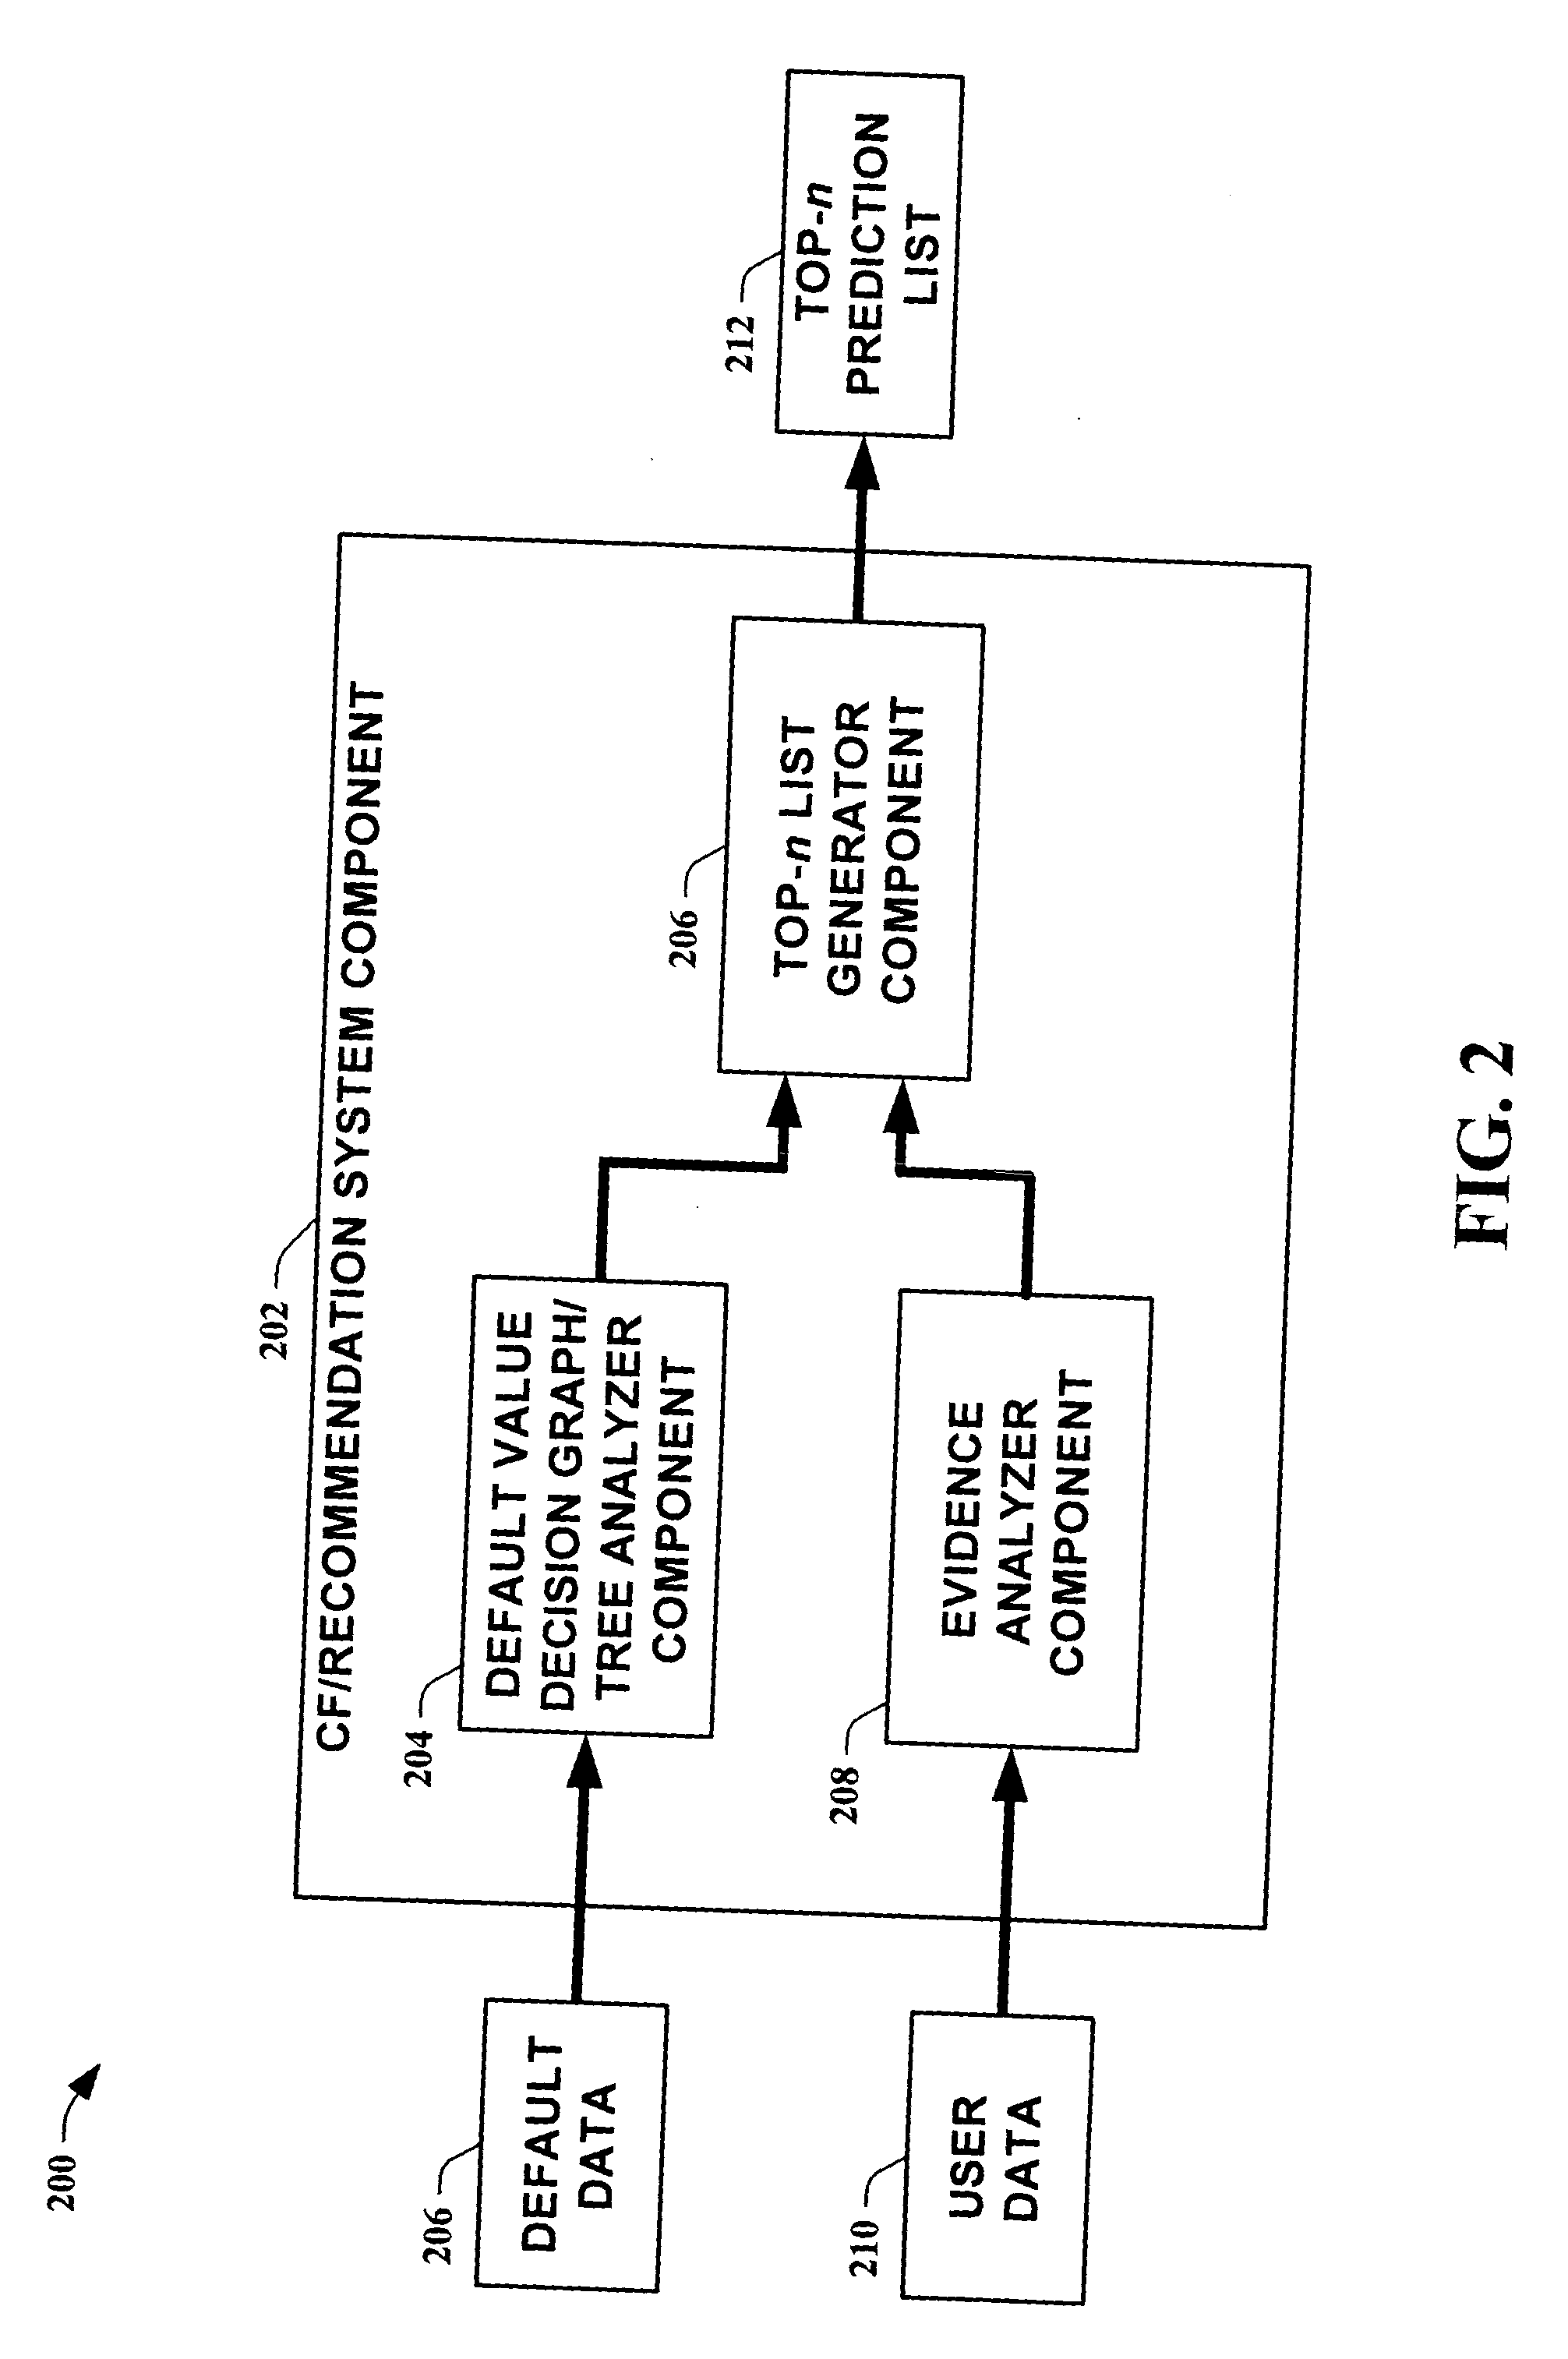 Systems and methods for optimizing decision graph collaborative filtering